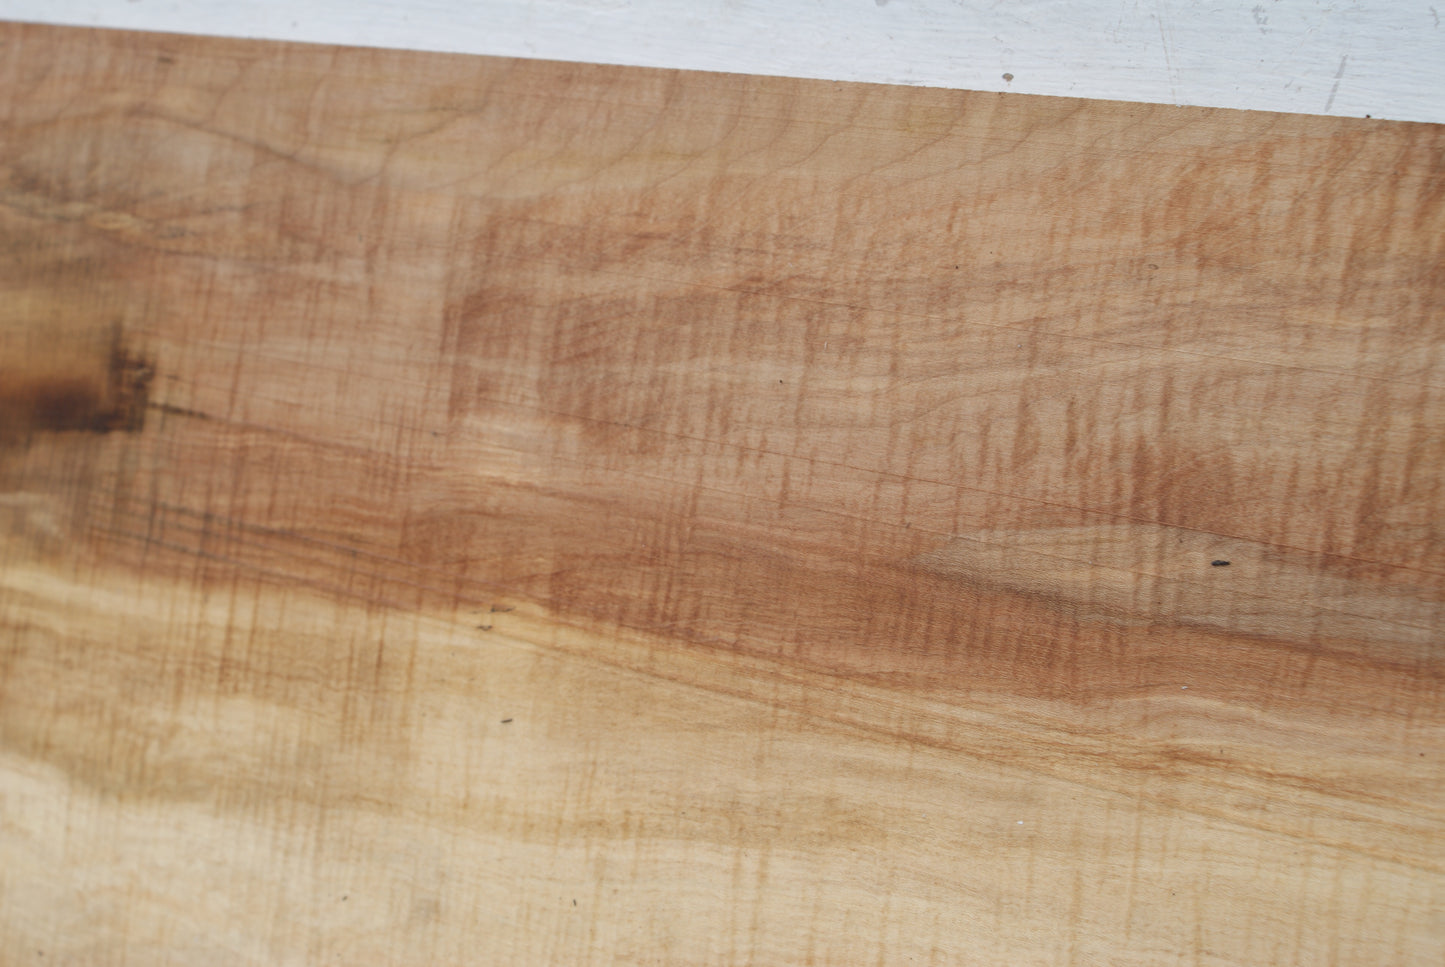 Spalted Rippled Sycamore 1278 L x 465 - 357  W x 46 D (mm) (458)